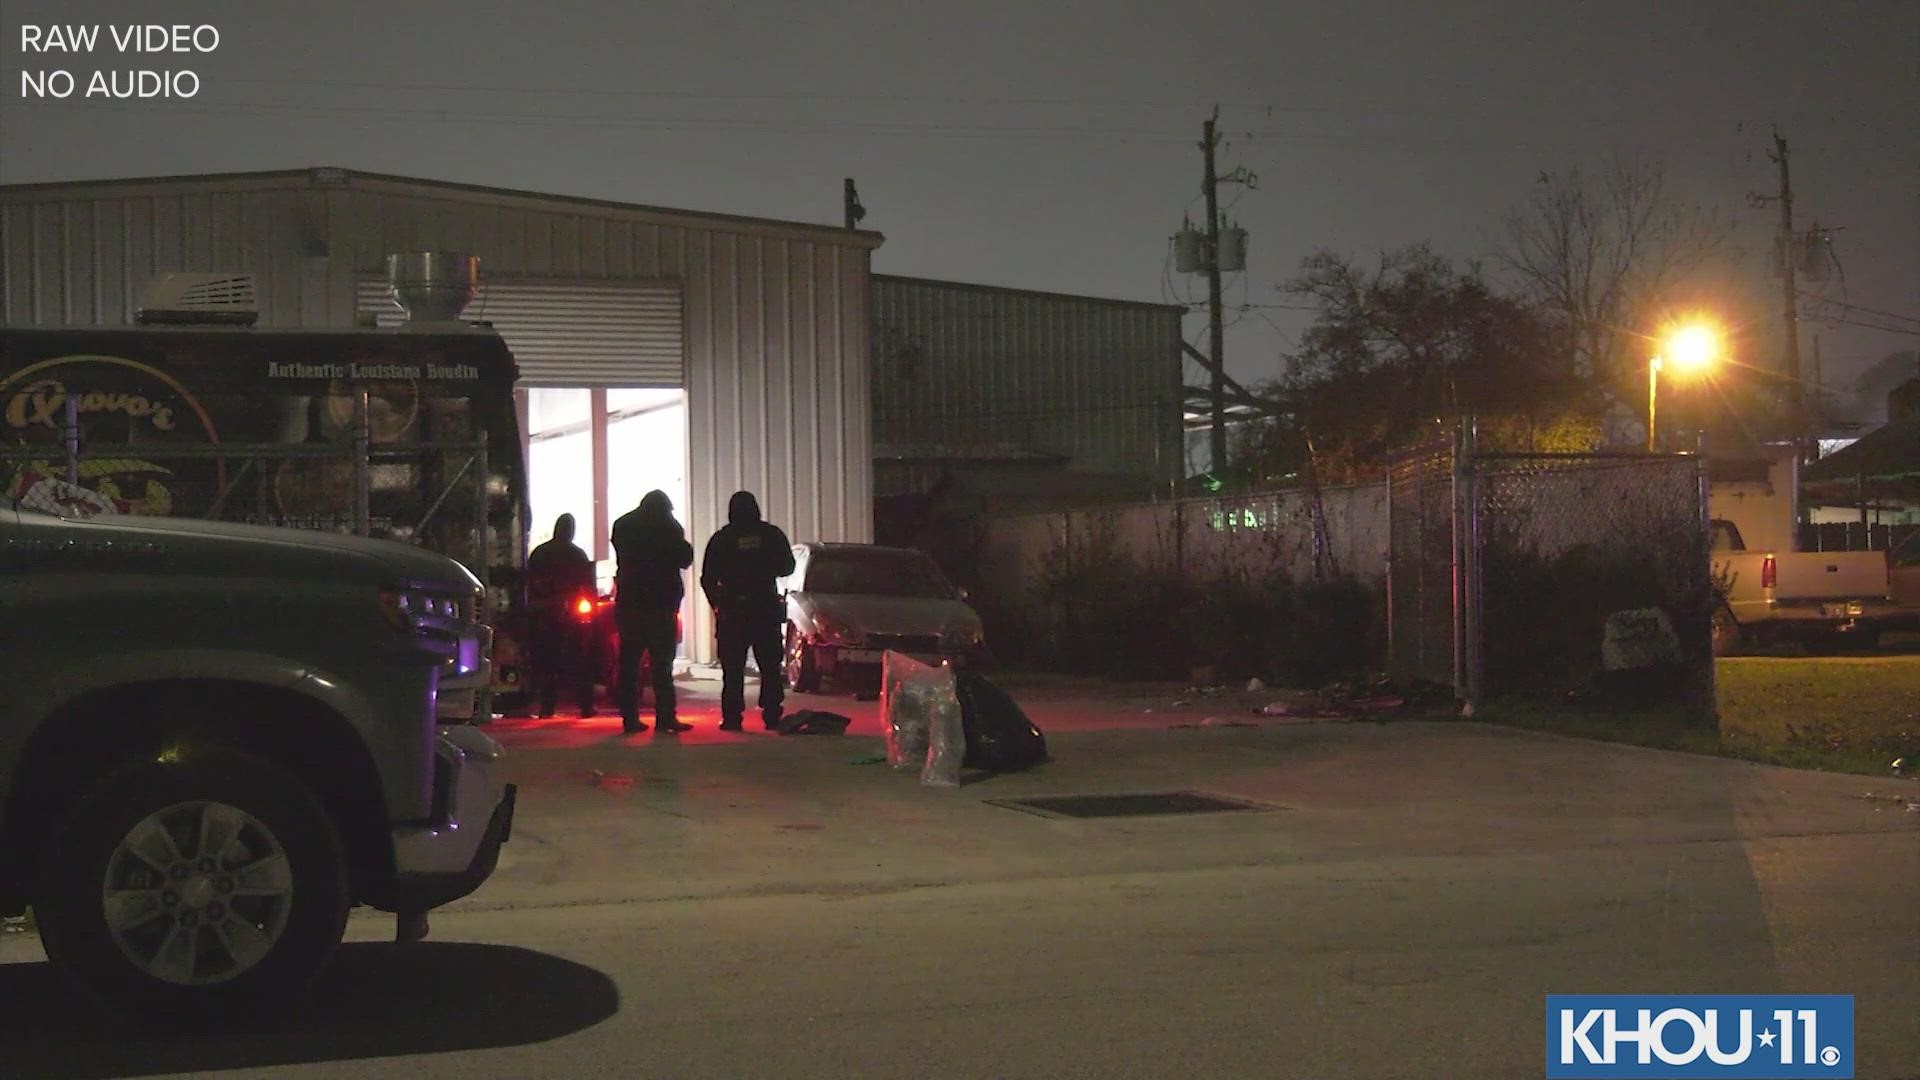 Four people were arrested Tuesday night during a drug bust in northwest Houston, according to the Texas Department of Public Safety.